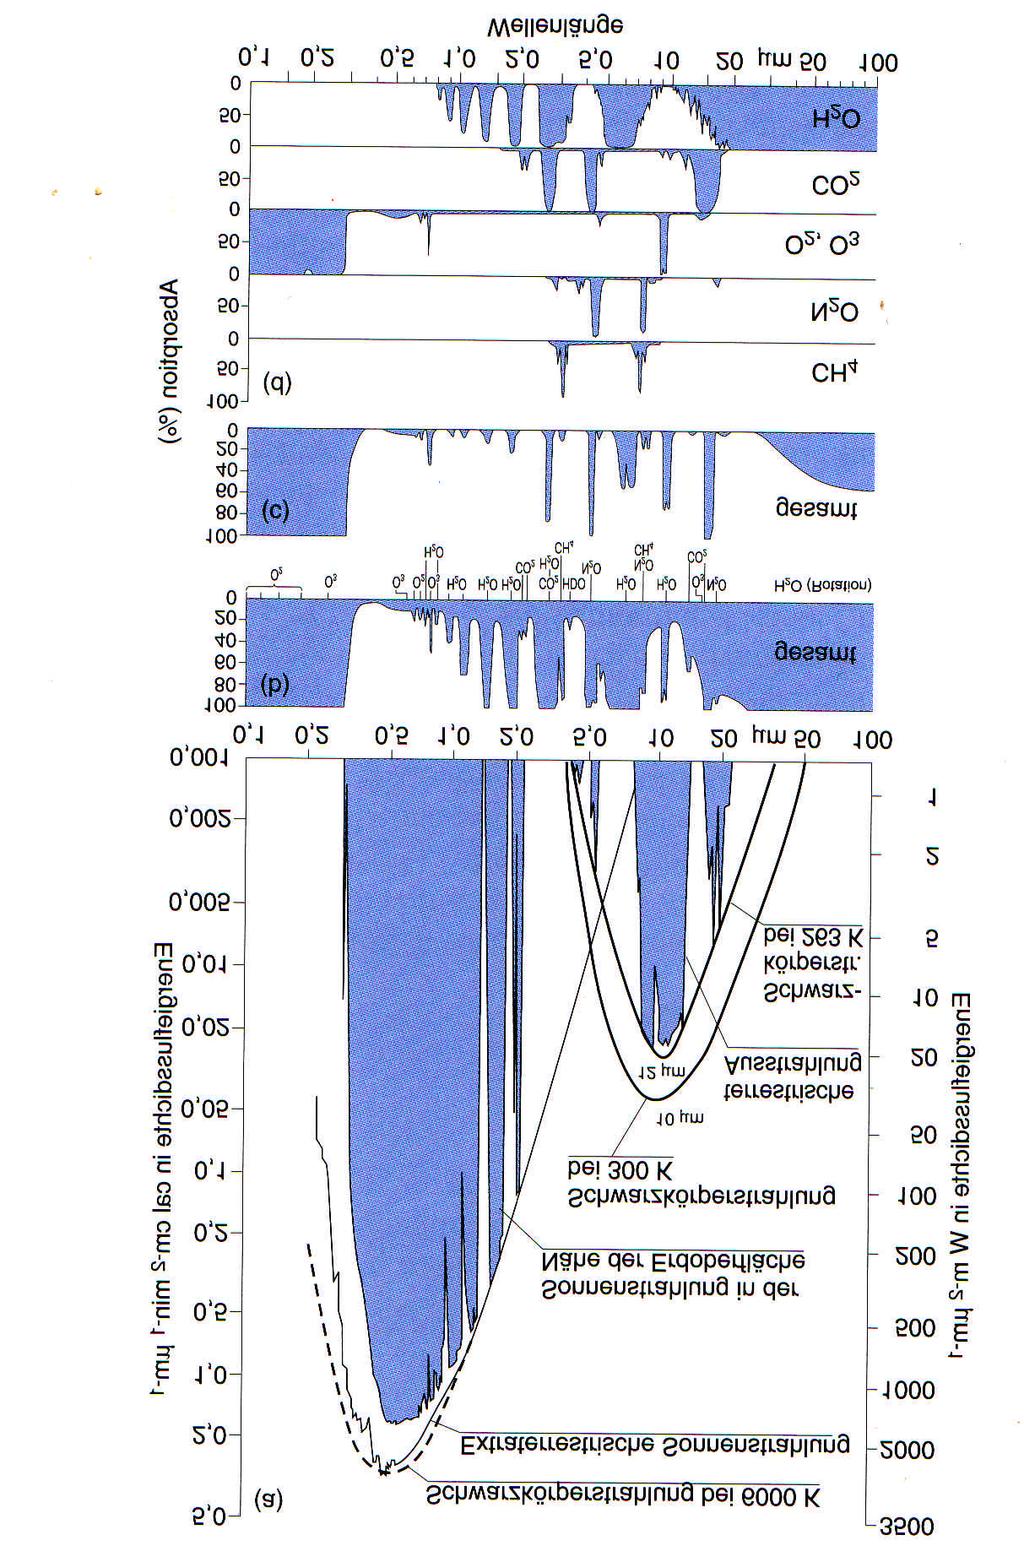 non-co 2 greenhouse gases Spectral distribution of radiation from Sun and Earth in comparison to a